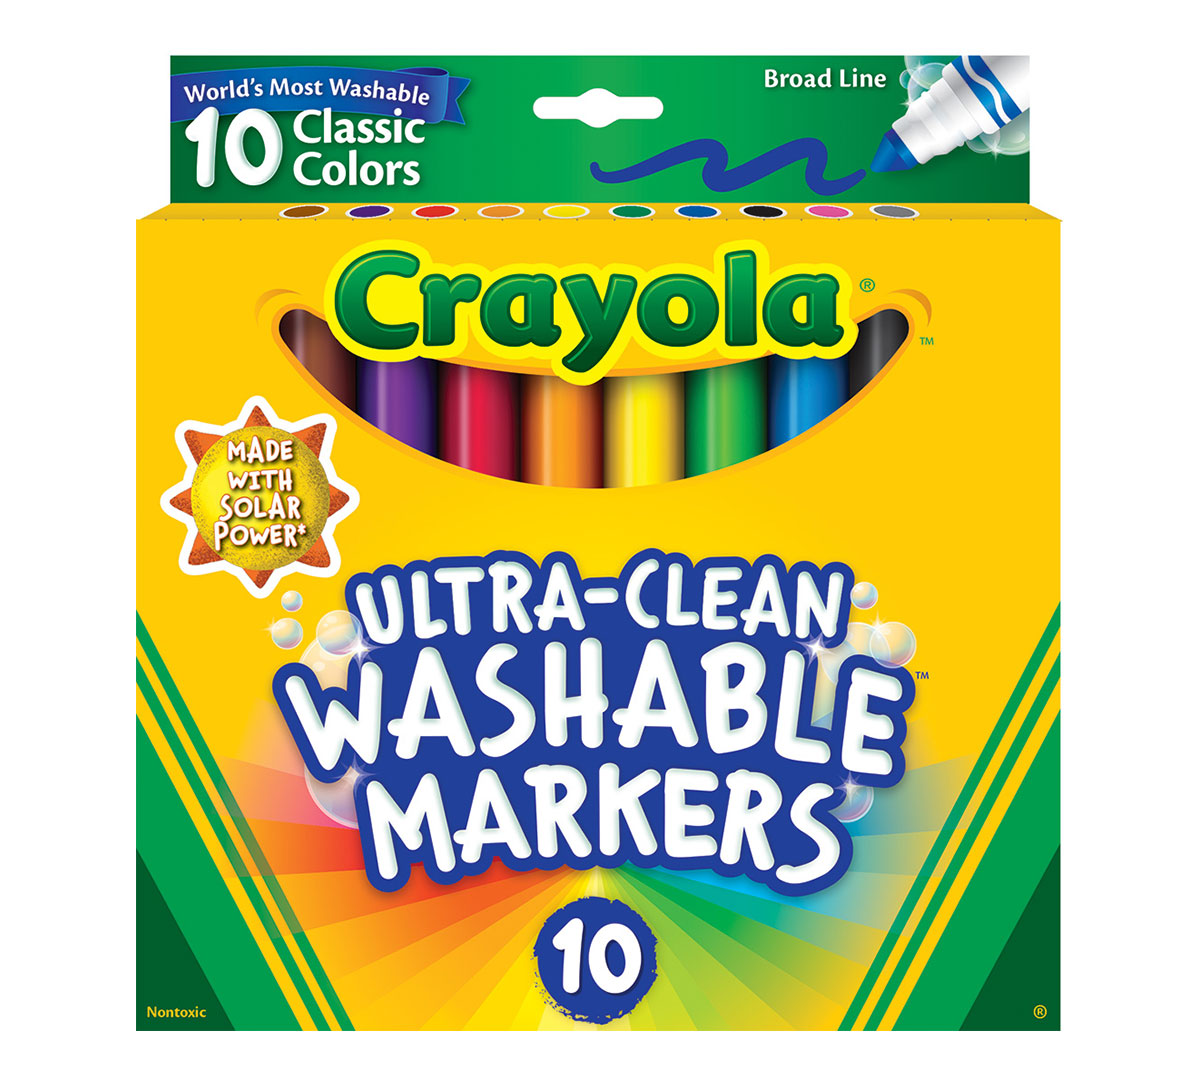 https://shop.crayola.com/on/demandware.static/-/Sites-crayola-storefront/default/dwcc0a53c5/images/58-7851-0-202_Eco_10ct_Markers-Broad-Line-Ultra-Clean-Washable_F-R.jpg